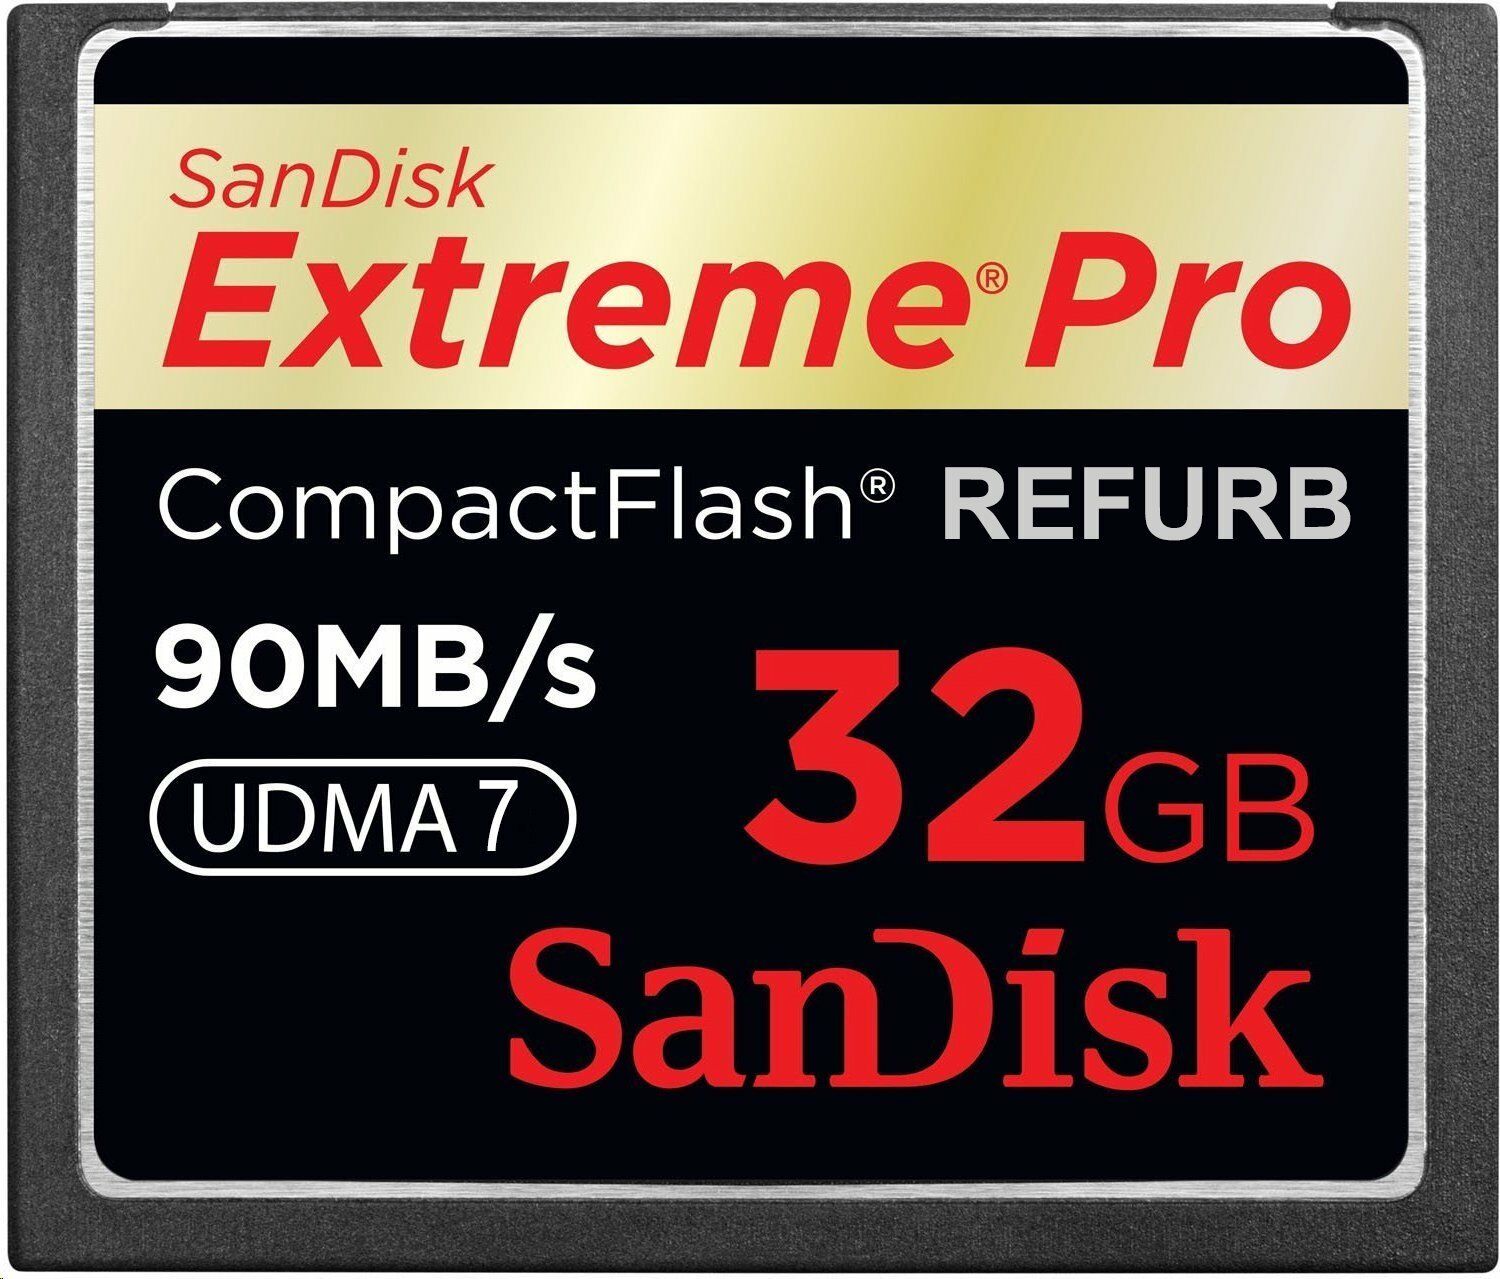 SanDisk Extreme PRO 32GB CompactFlash Memory Card UDMA 7 Speed Up To 90MB/s- SDCFXP-032G-X46 (Certified Refurbished)